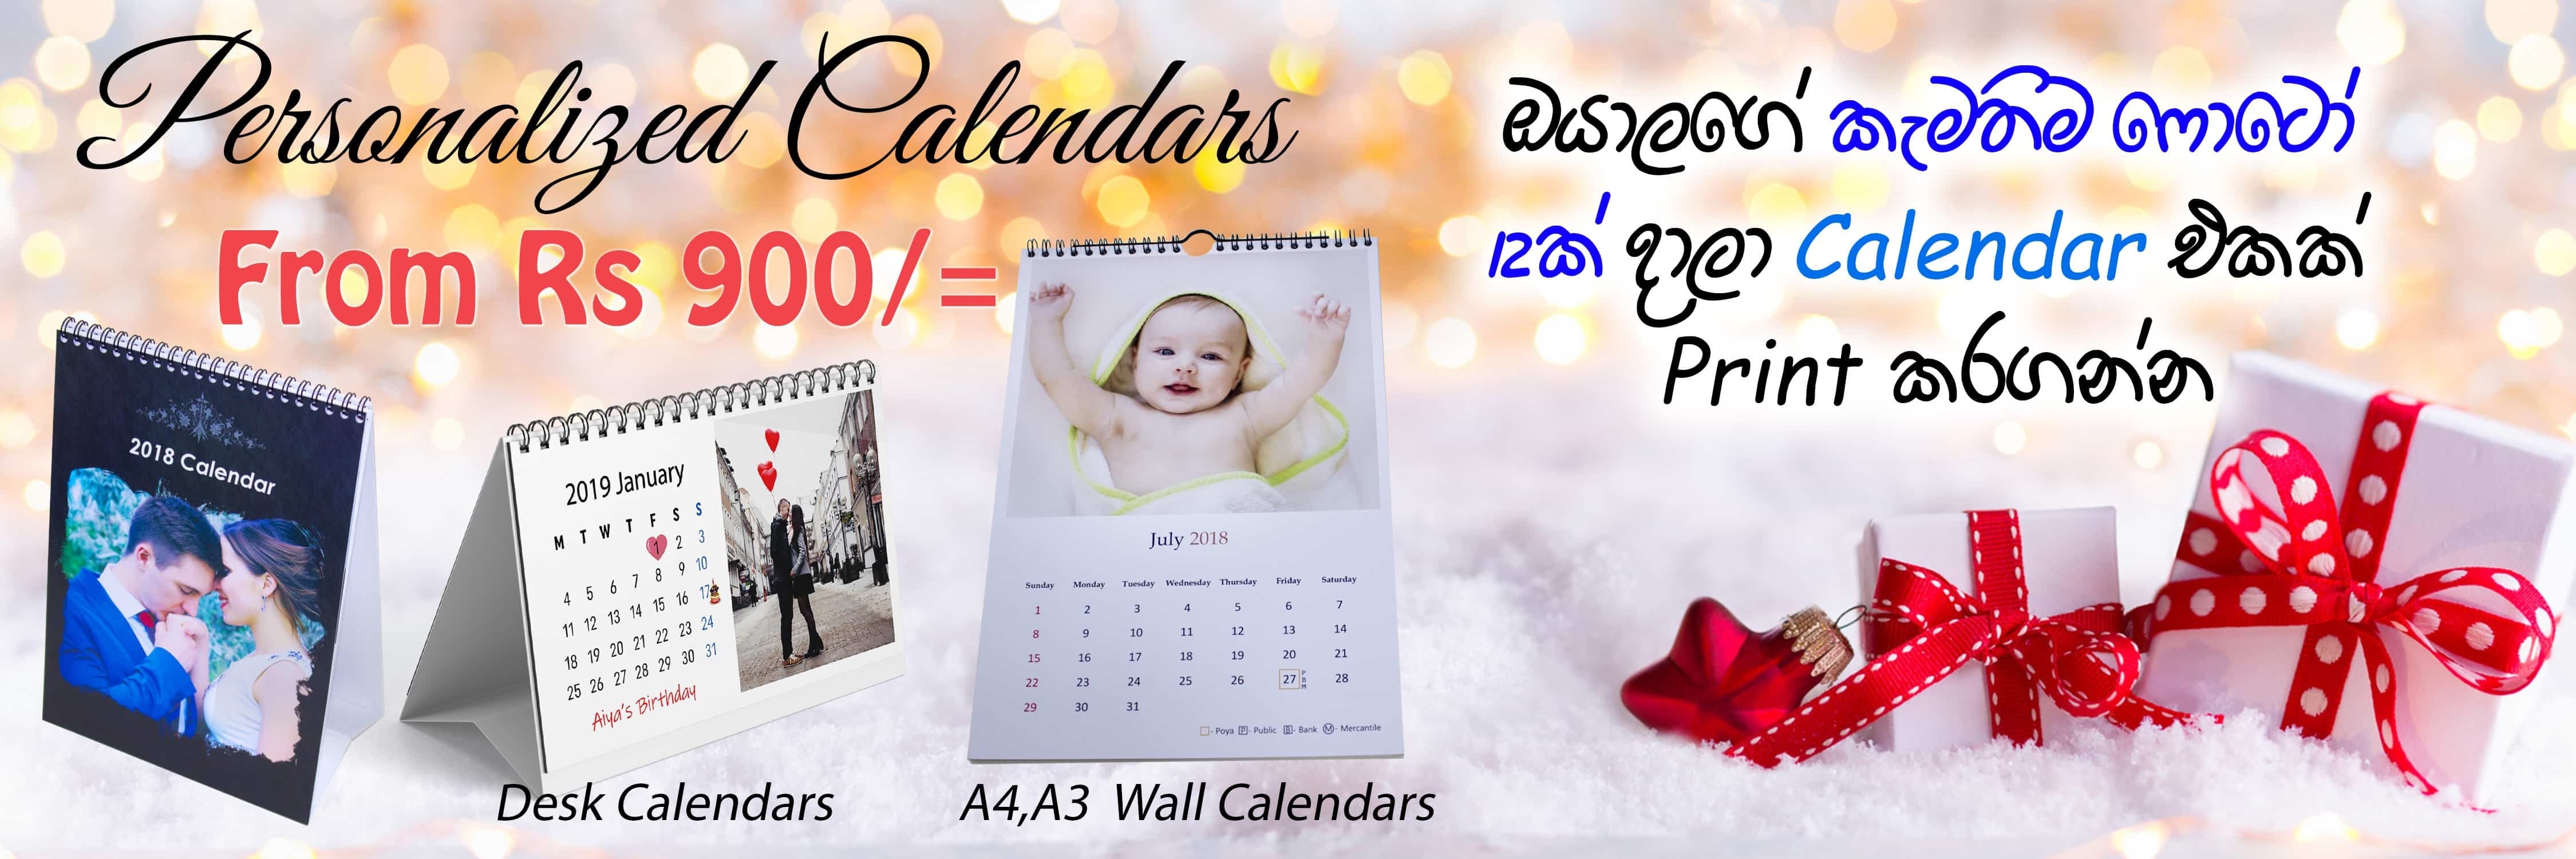 Photo Books Personalized Gifts Printing In Sri Lanka - Jam Photo Books Calendar Printing Sri Lanka